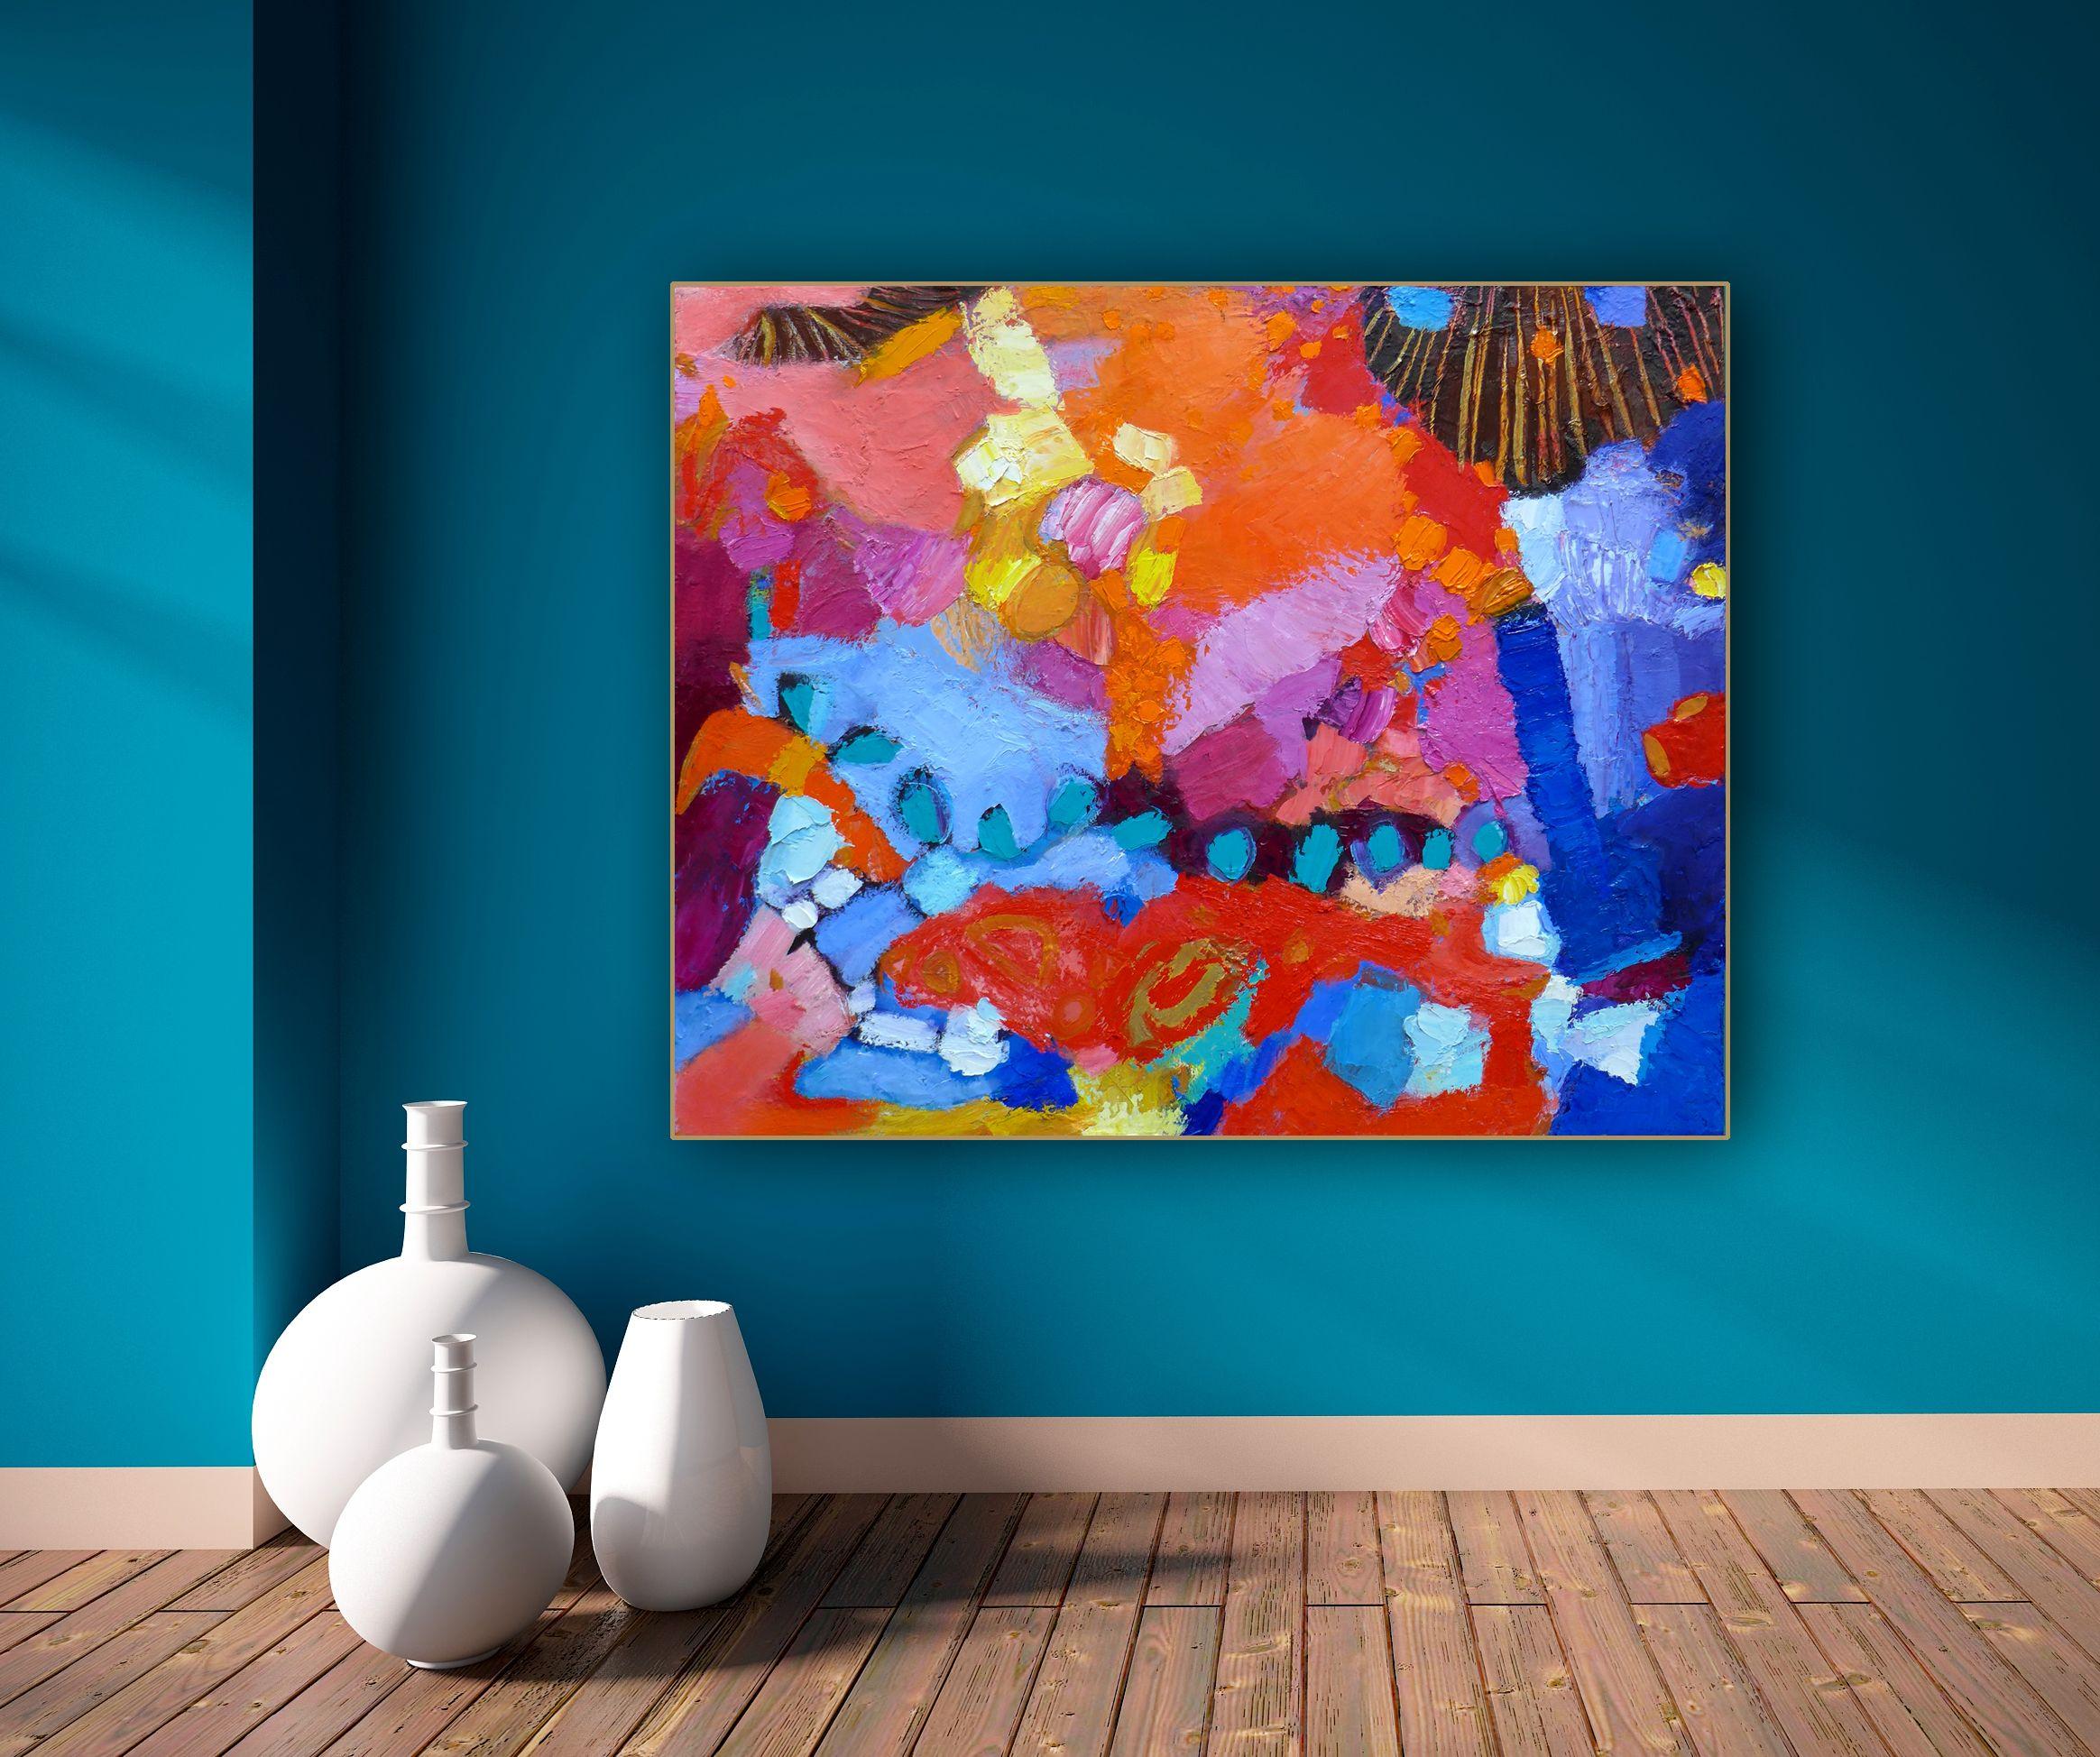 The Colors Throw A Party, Painting, Oil on Canvas 1